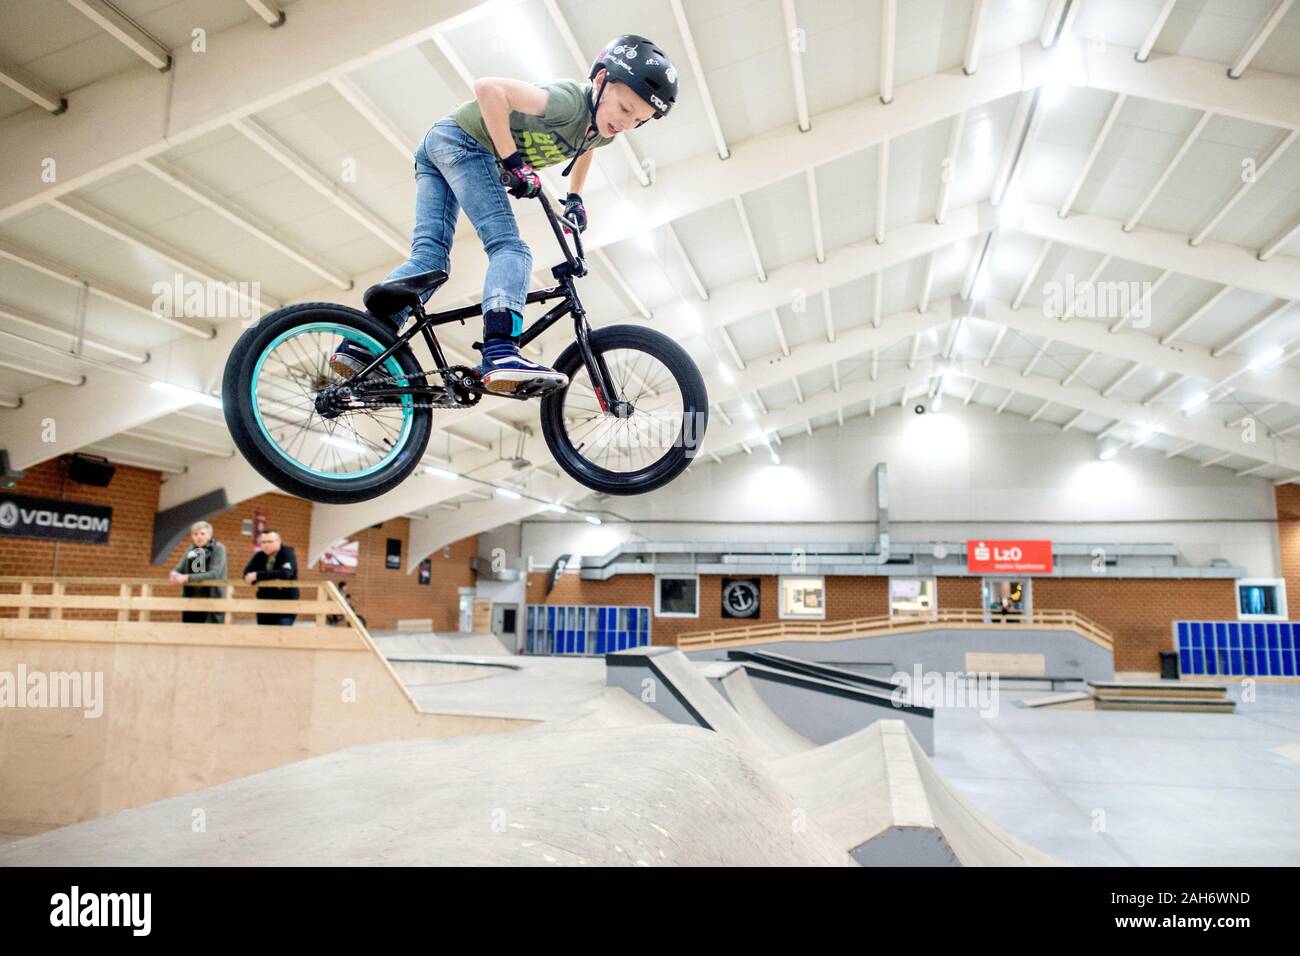 Oldenburg, Germany. 25th Dec, 2019. Joris jumps with his BMX bike in the  skate hall "Backyard" in the Alexandersfeld district. The skate hall opened  in 2018 in a former tennis hall, which